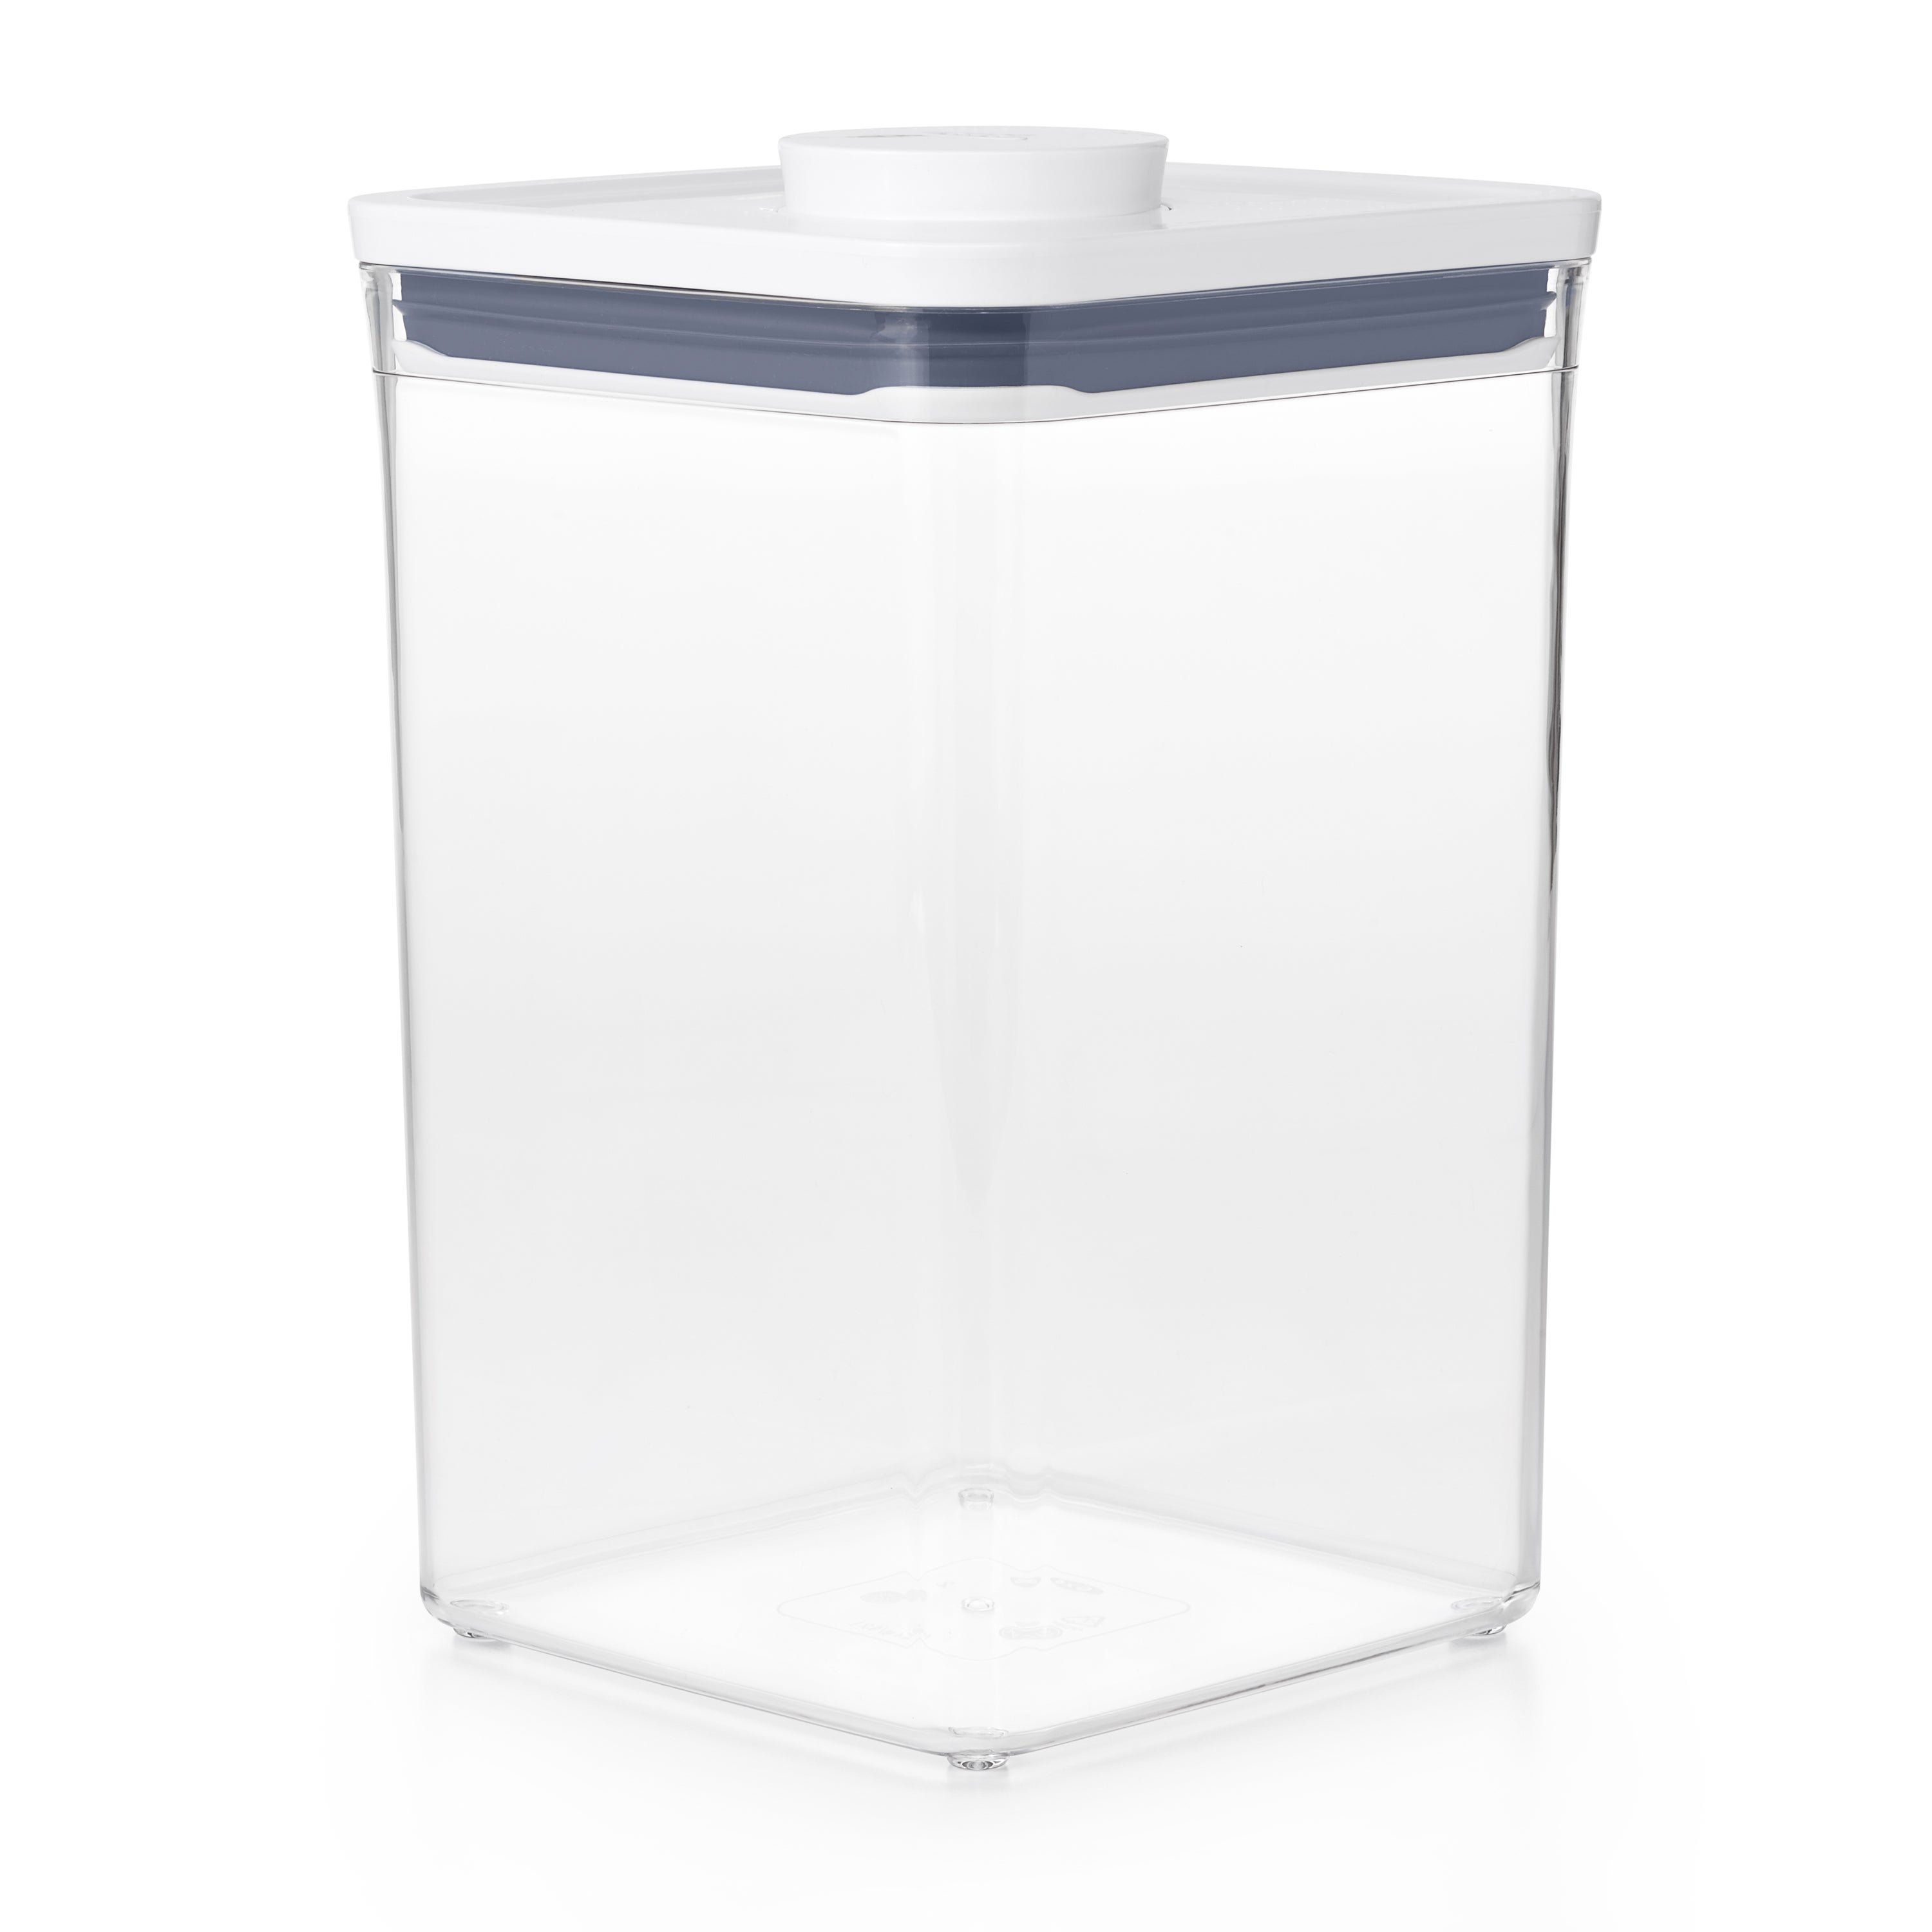 900ml/2.4L/3.4L Clear Food Storage Containers Large Capacity Airtight  Kitchen Canisters Dry Food Storage Jars Pantry Organizer